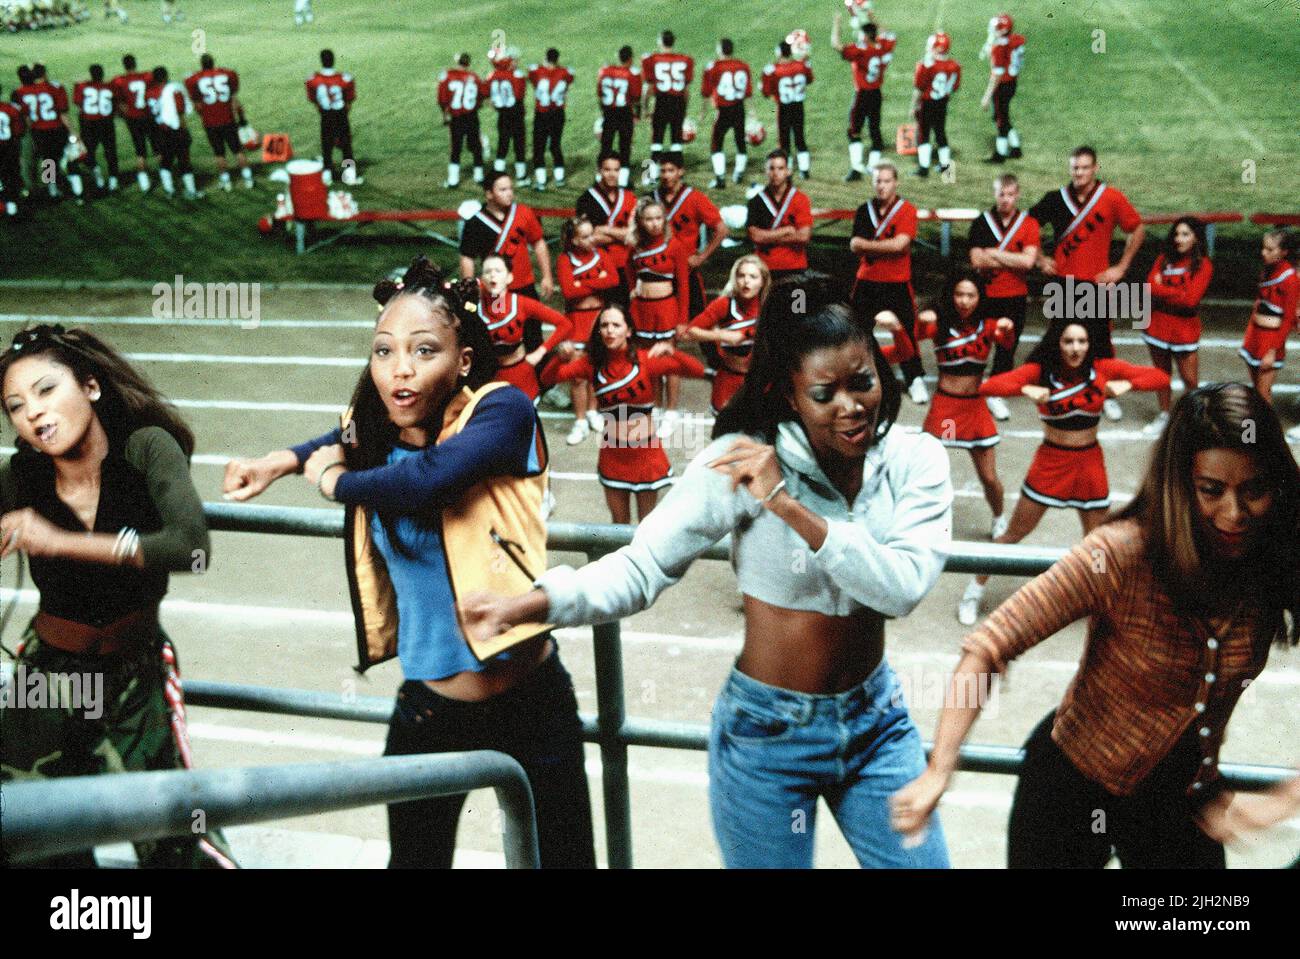 WILLIAMS, FEARS, UNION, REED, BRING IT ON, 2000 Stockfoto